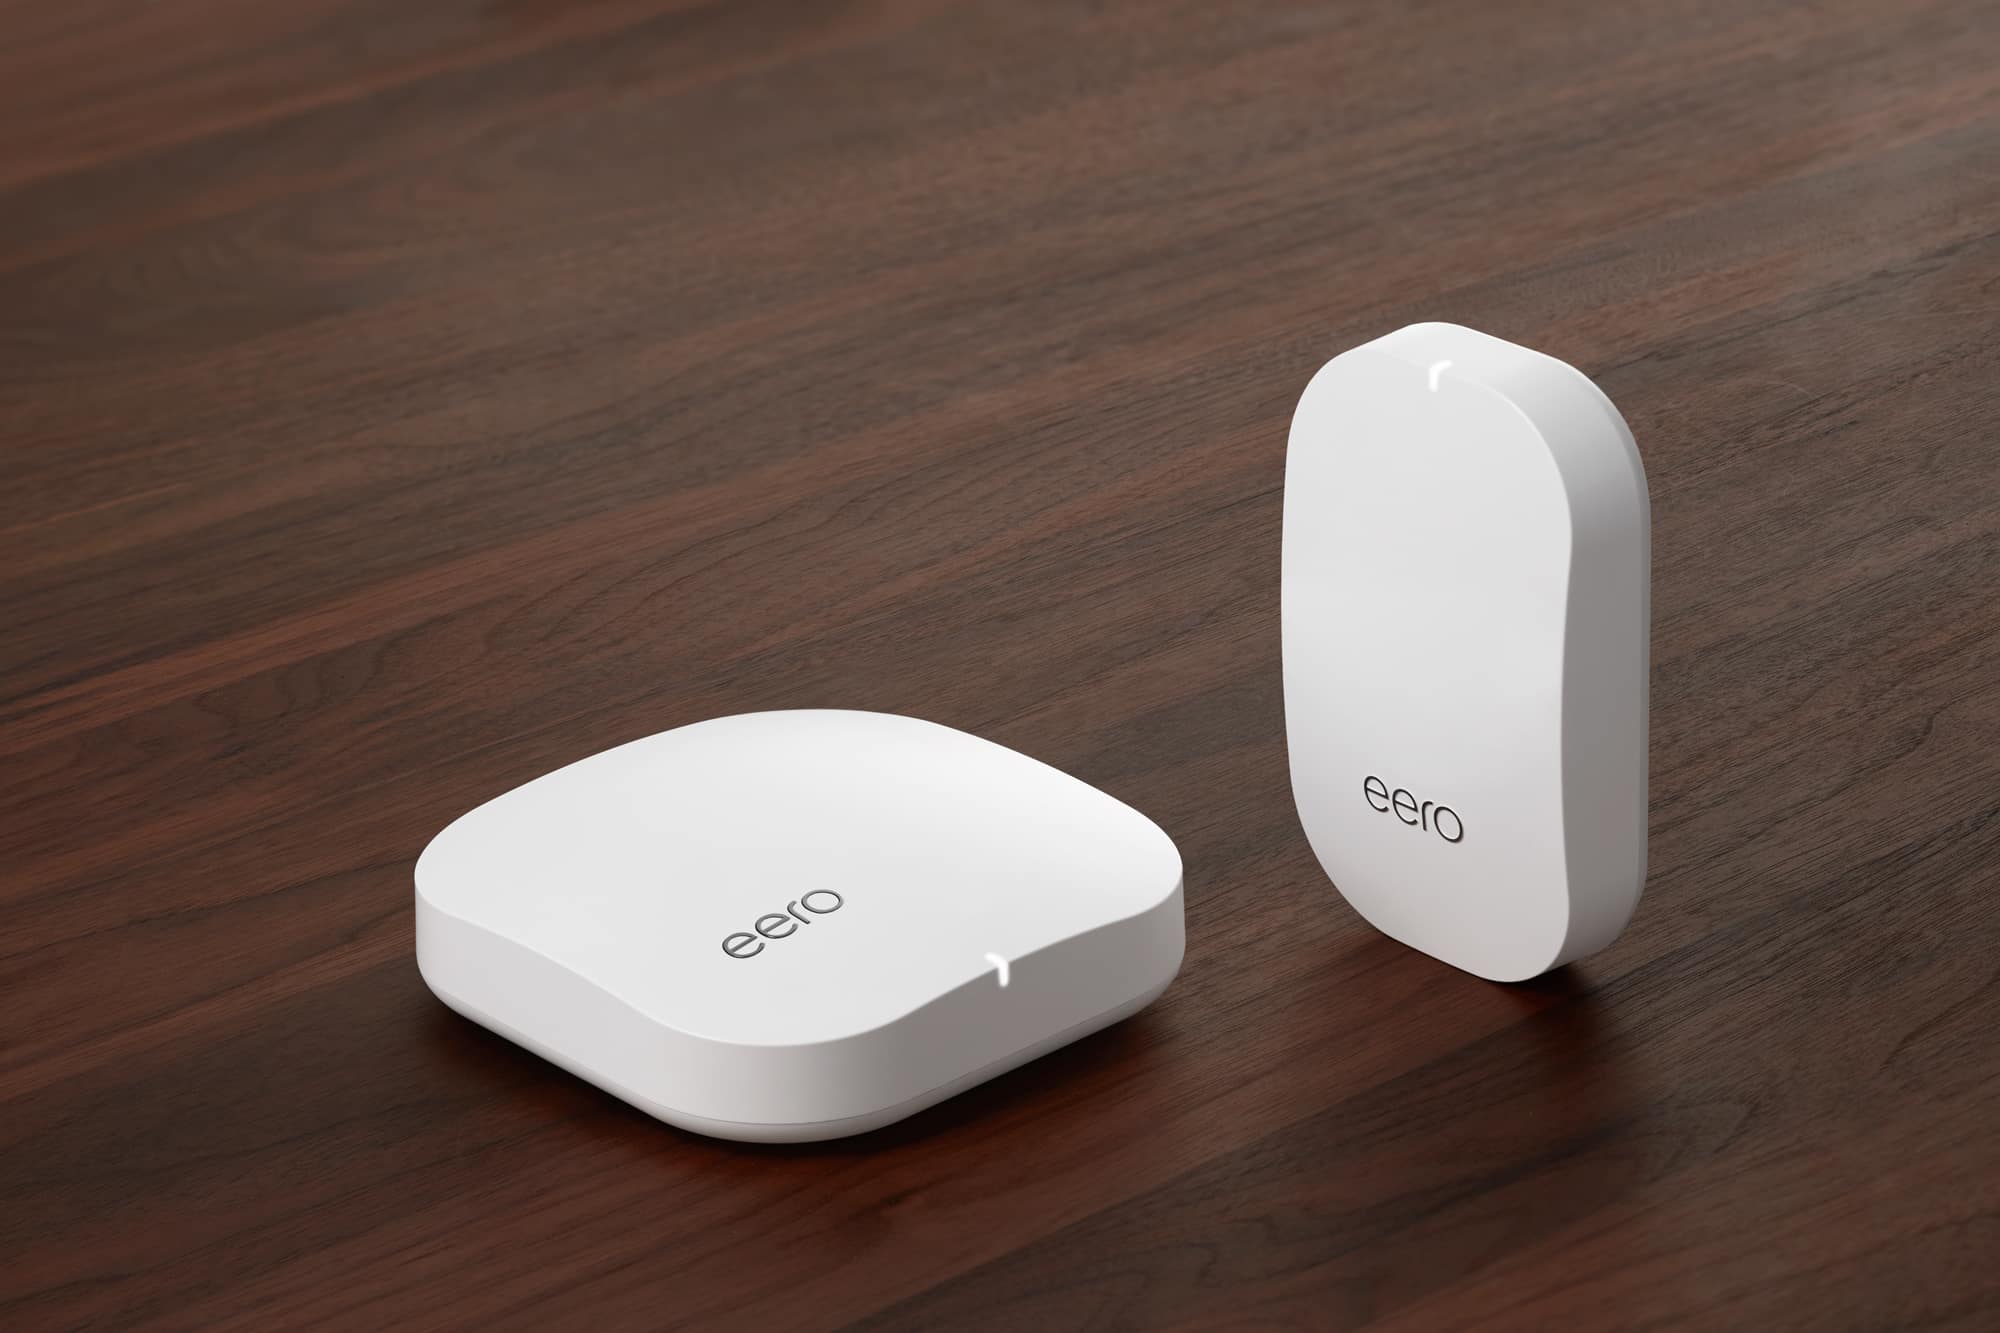 Eero's second-generation devices have landed.